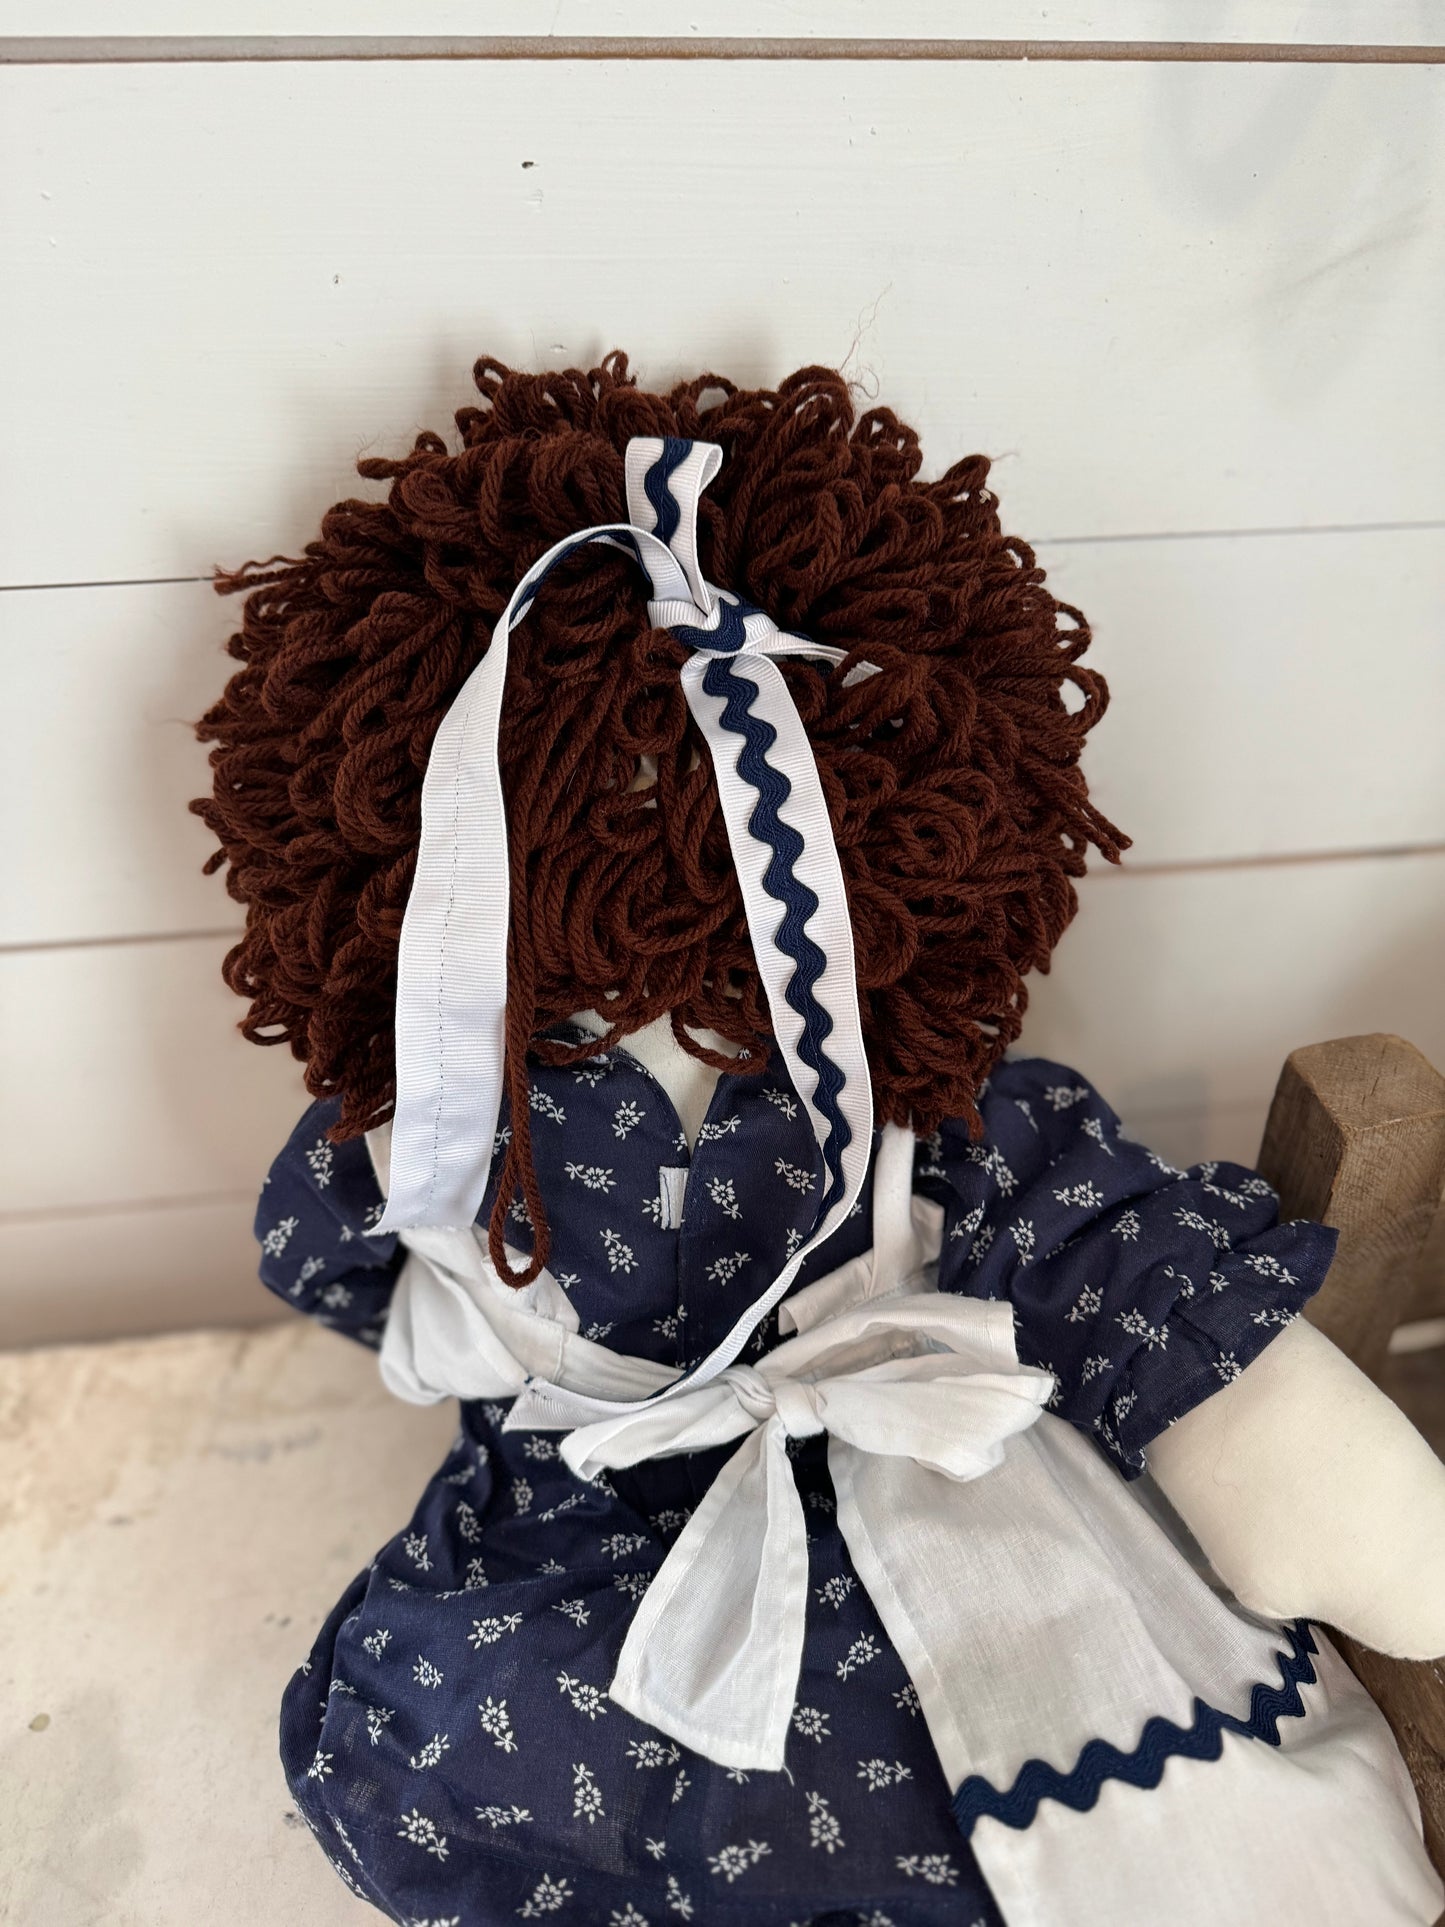 Raggedy Anne Doll in Navy Dress Hand Stitched